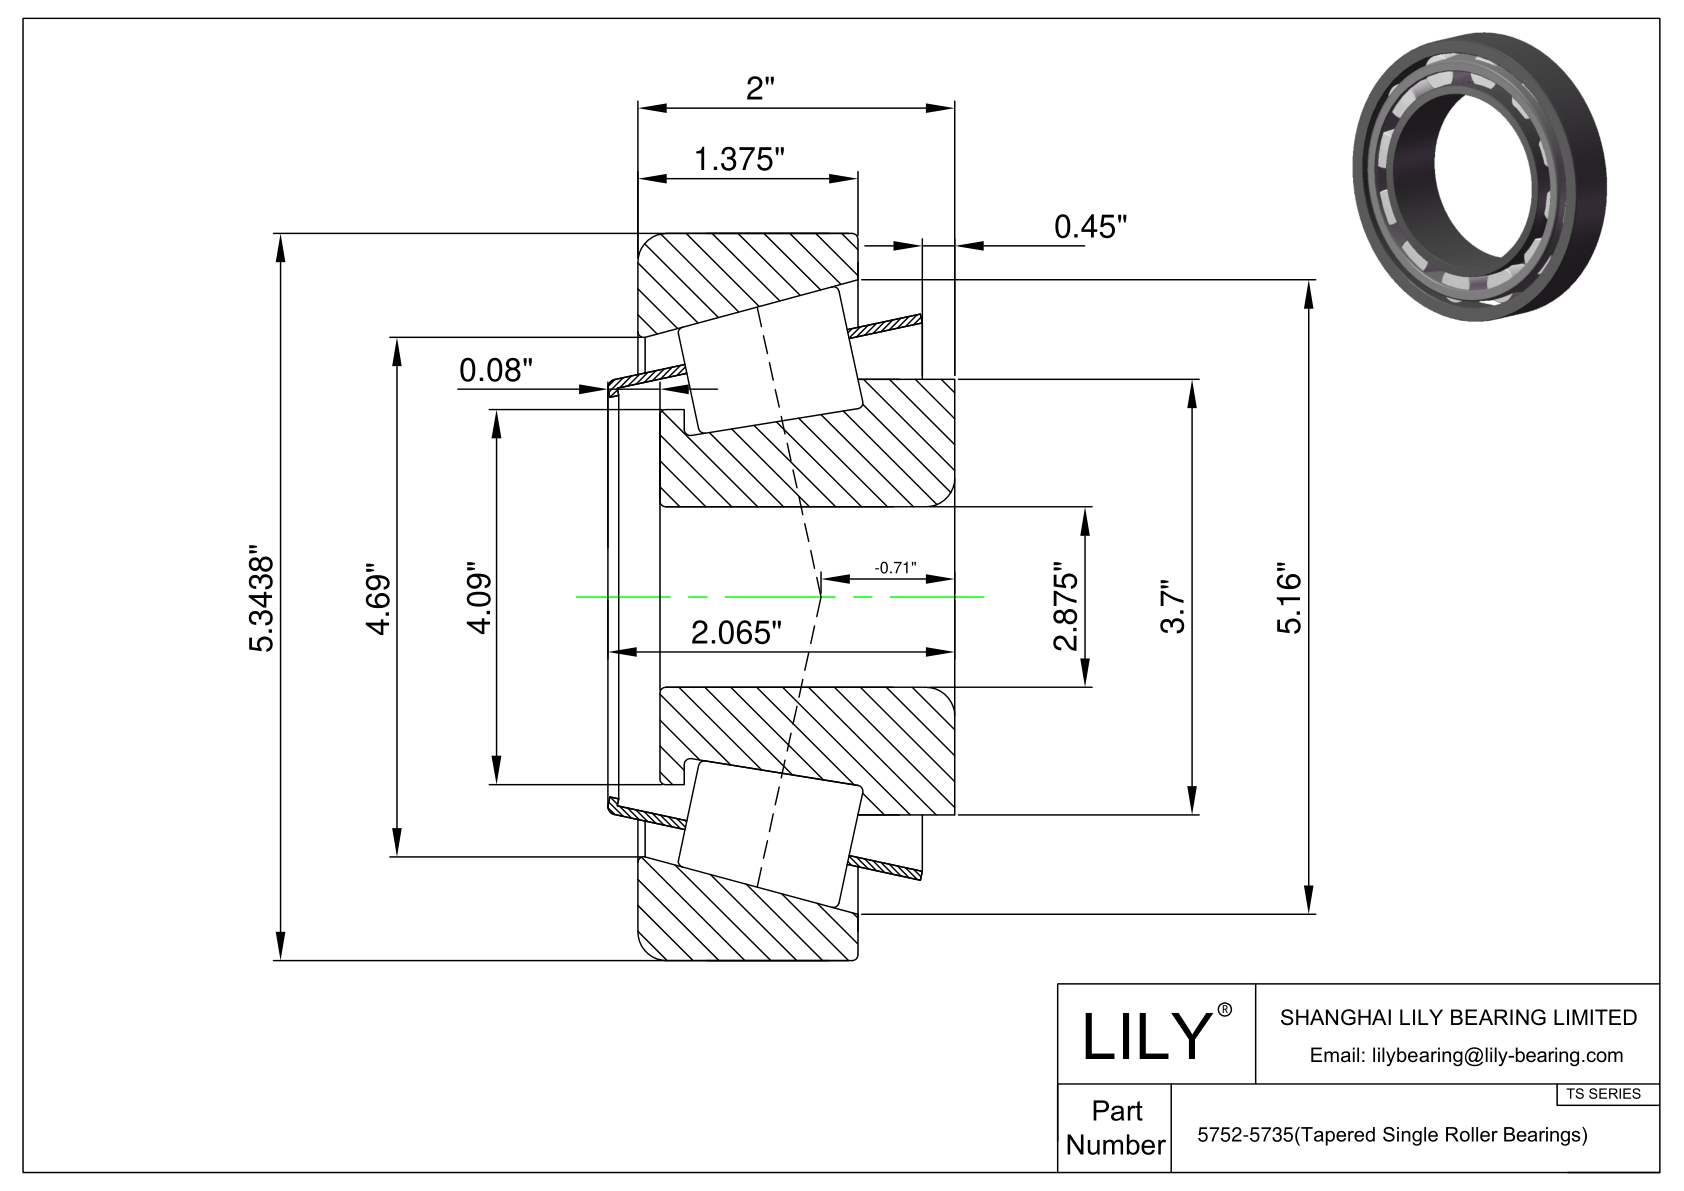 5752-5735 TS (Tapered Single Roller Bearings) (Imperial) cad drawing